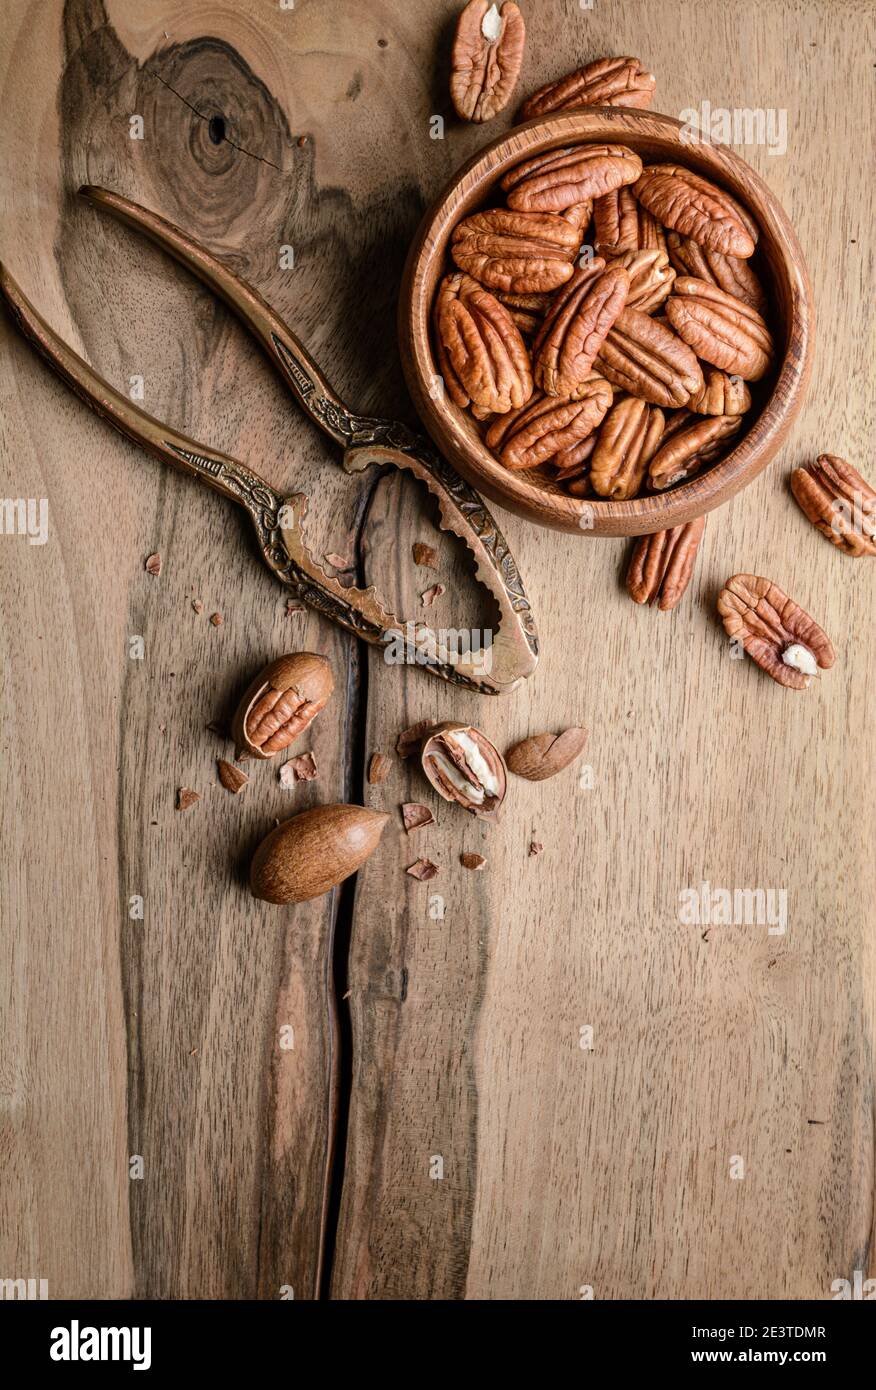 Healthy snack rich in vitamins and minerals, fresh shelled pecans in a bowl on wooden background with copy space Stock Photo